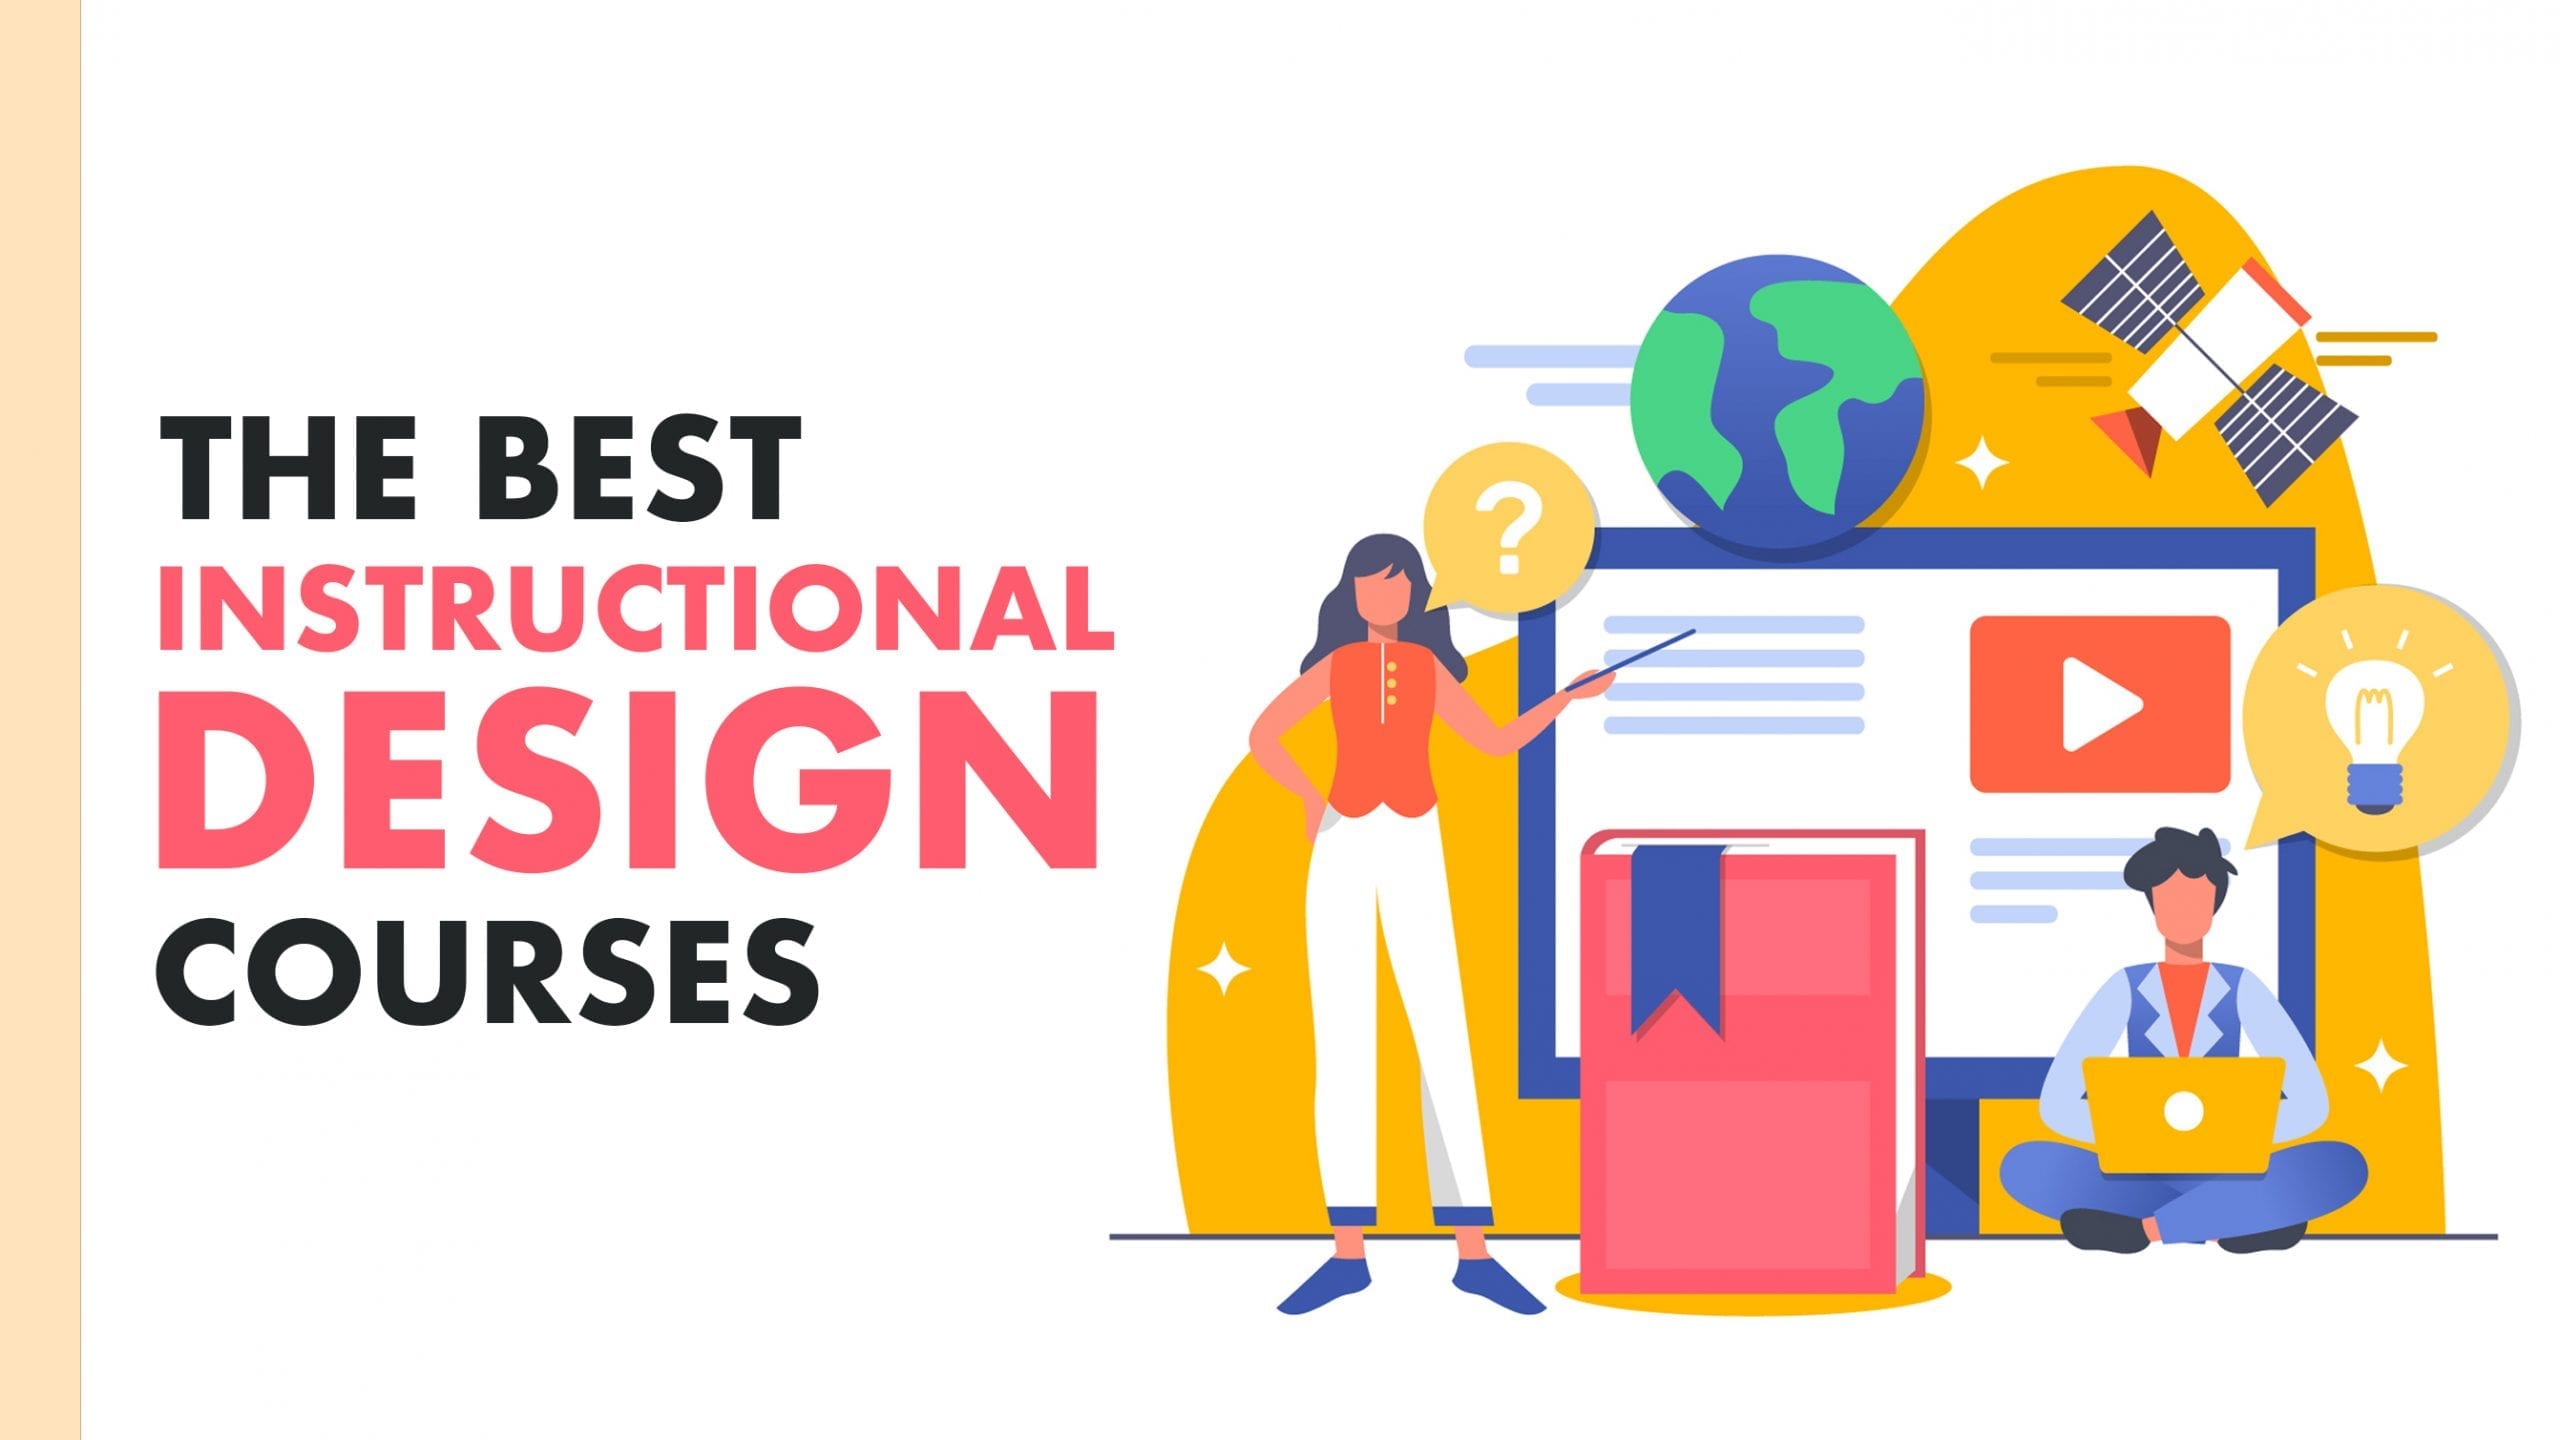 5 Best Instructional Design Courses + Classes + Tutorials With